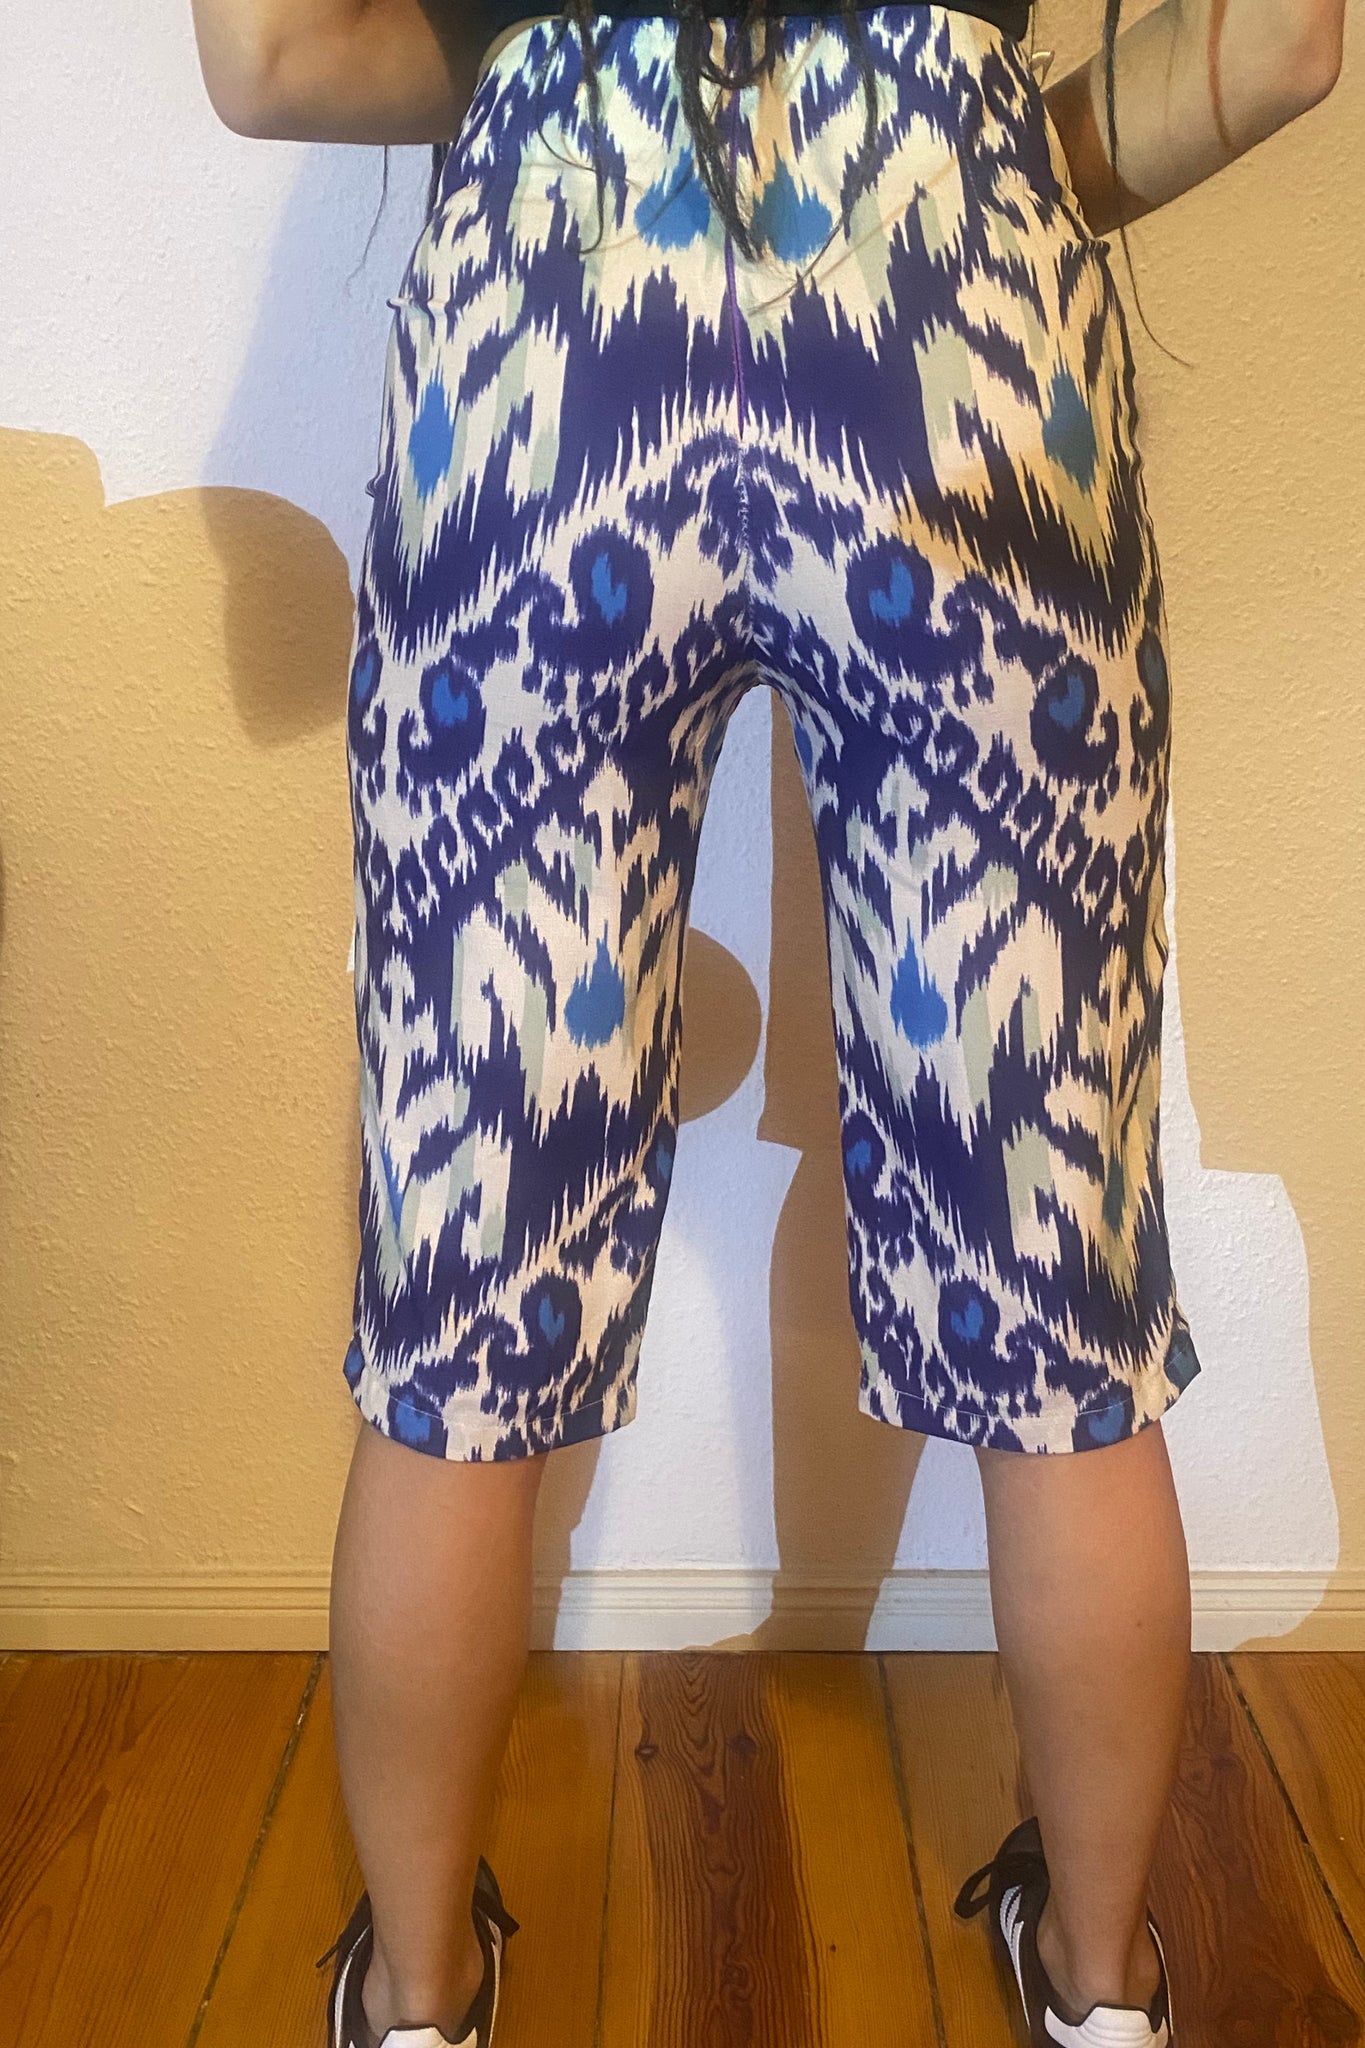 The backside of a woman in adras/ikat capris.